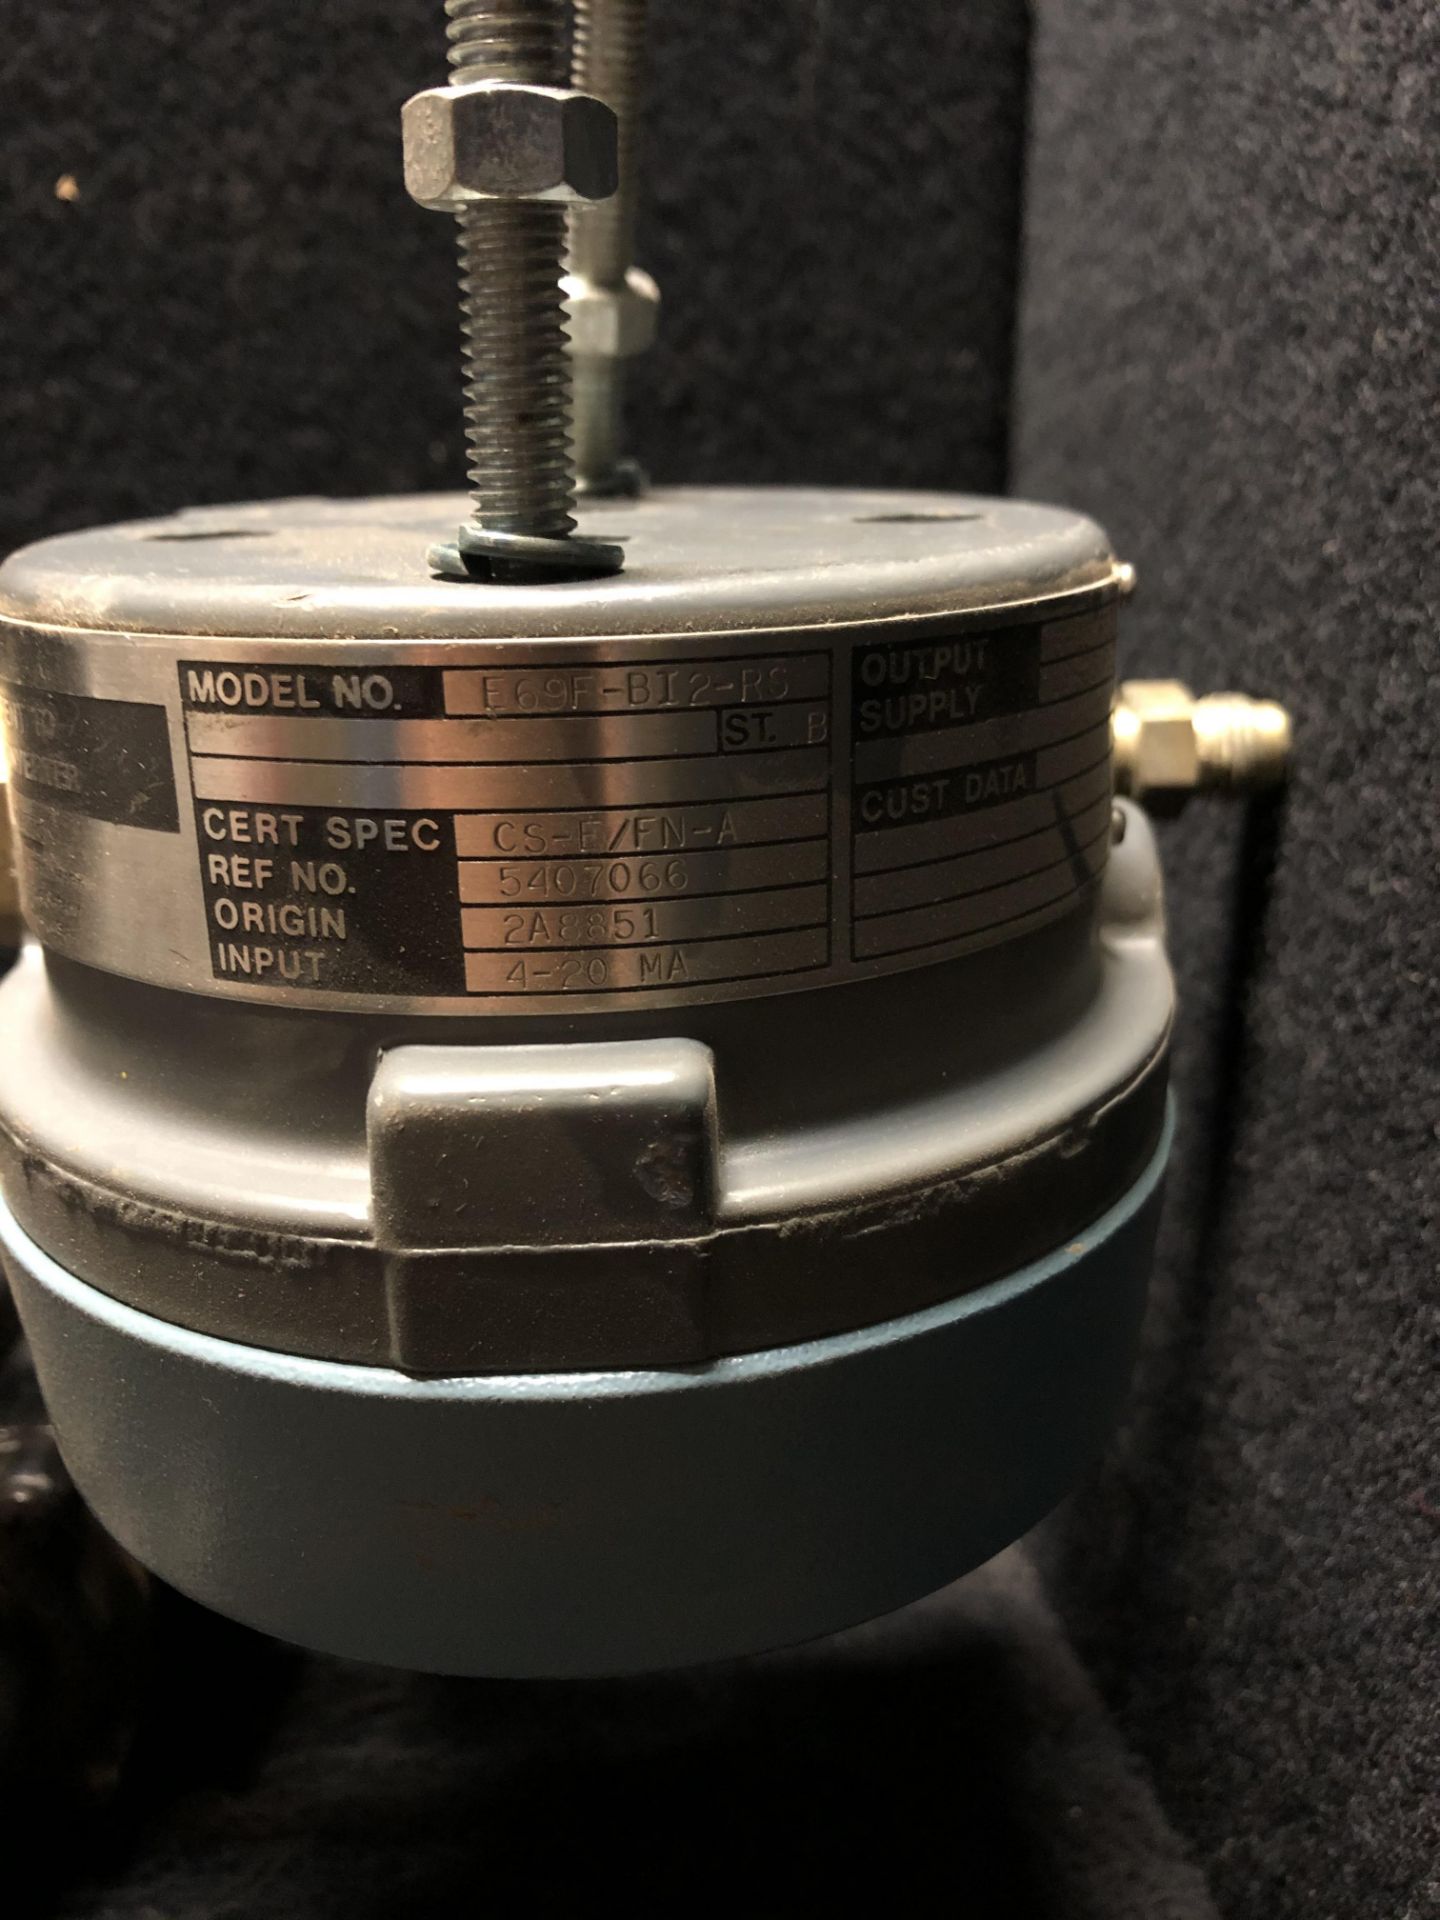 ONICON F-1210 DUAL TURBINE INSERTION FLOW METER, ANALOG OUTPUT & FOXBORO E69F-BI2-RS CURRENT-TO-AIR - Image 3 of 6